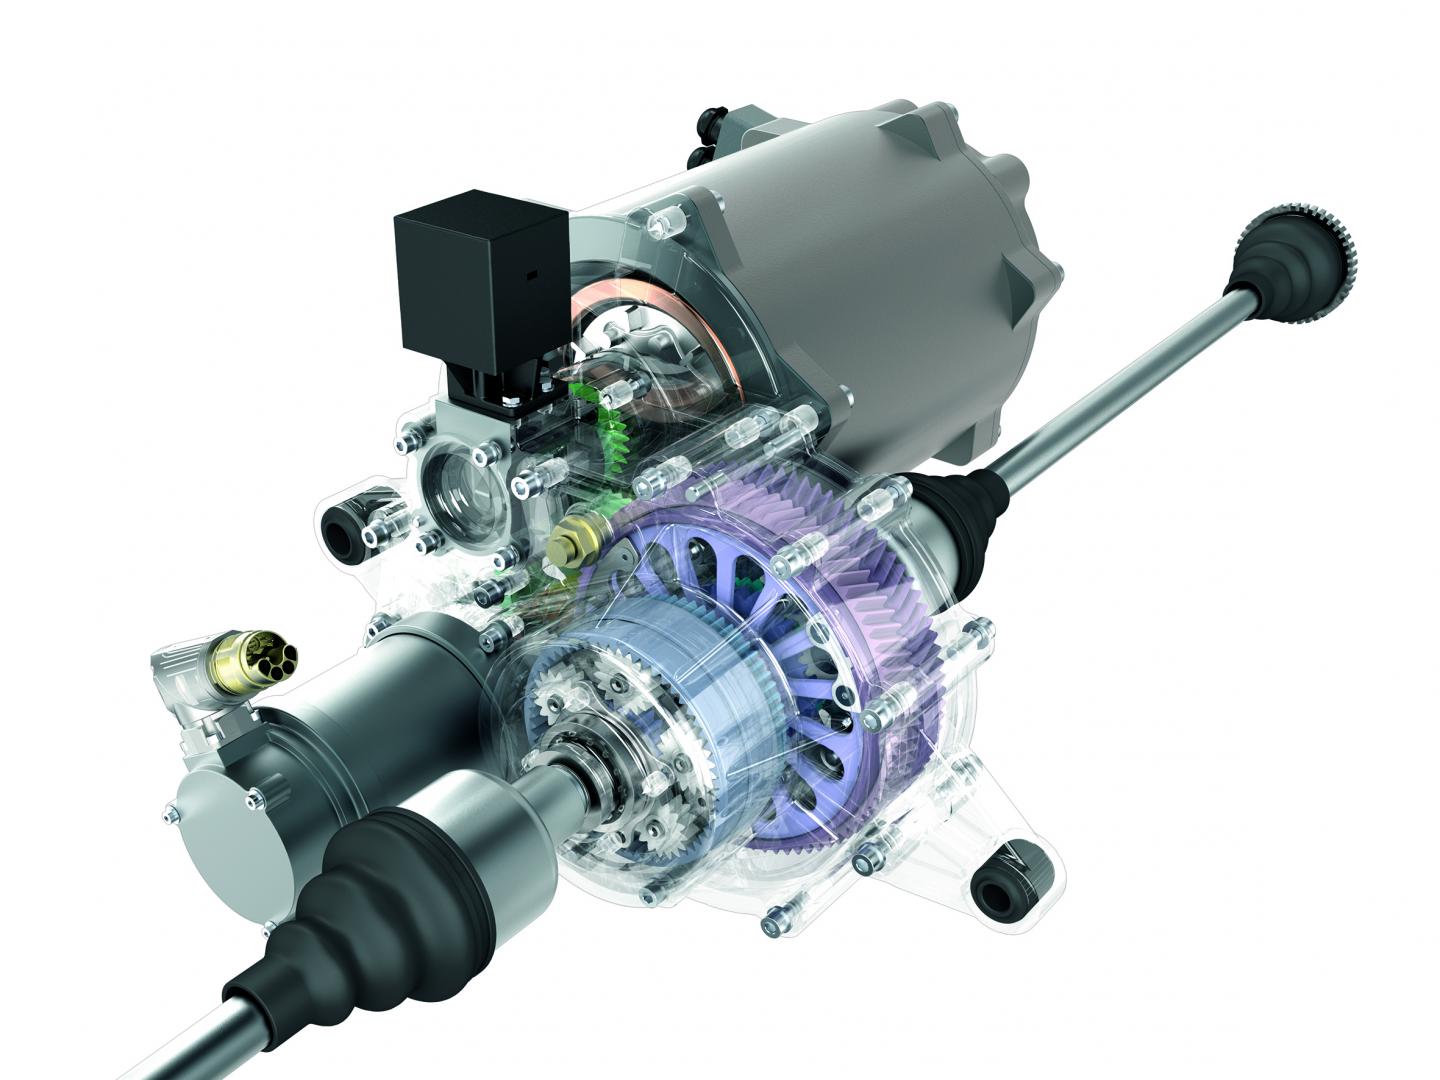 Torque Vectoring Transmission for Electric Vehicles